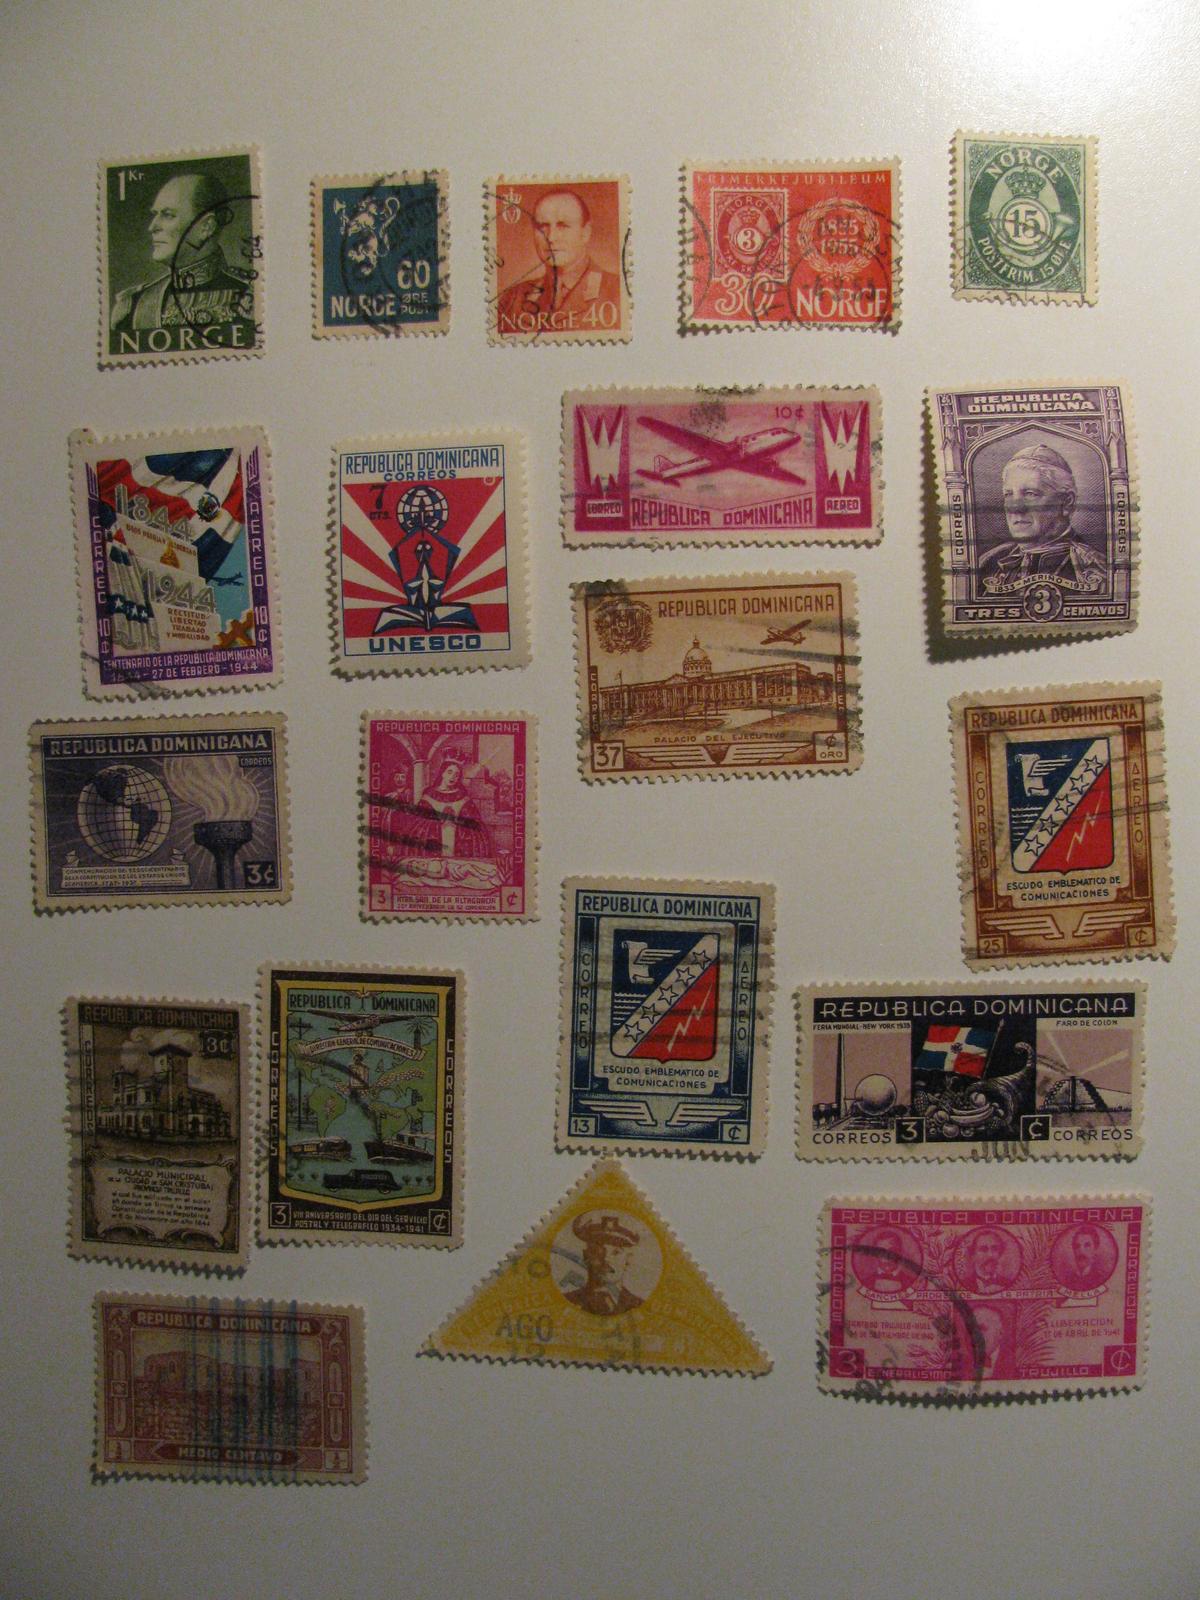 Vintage stamps set of: Norway & Dominican Republic